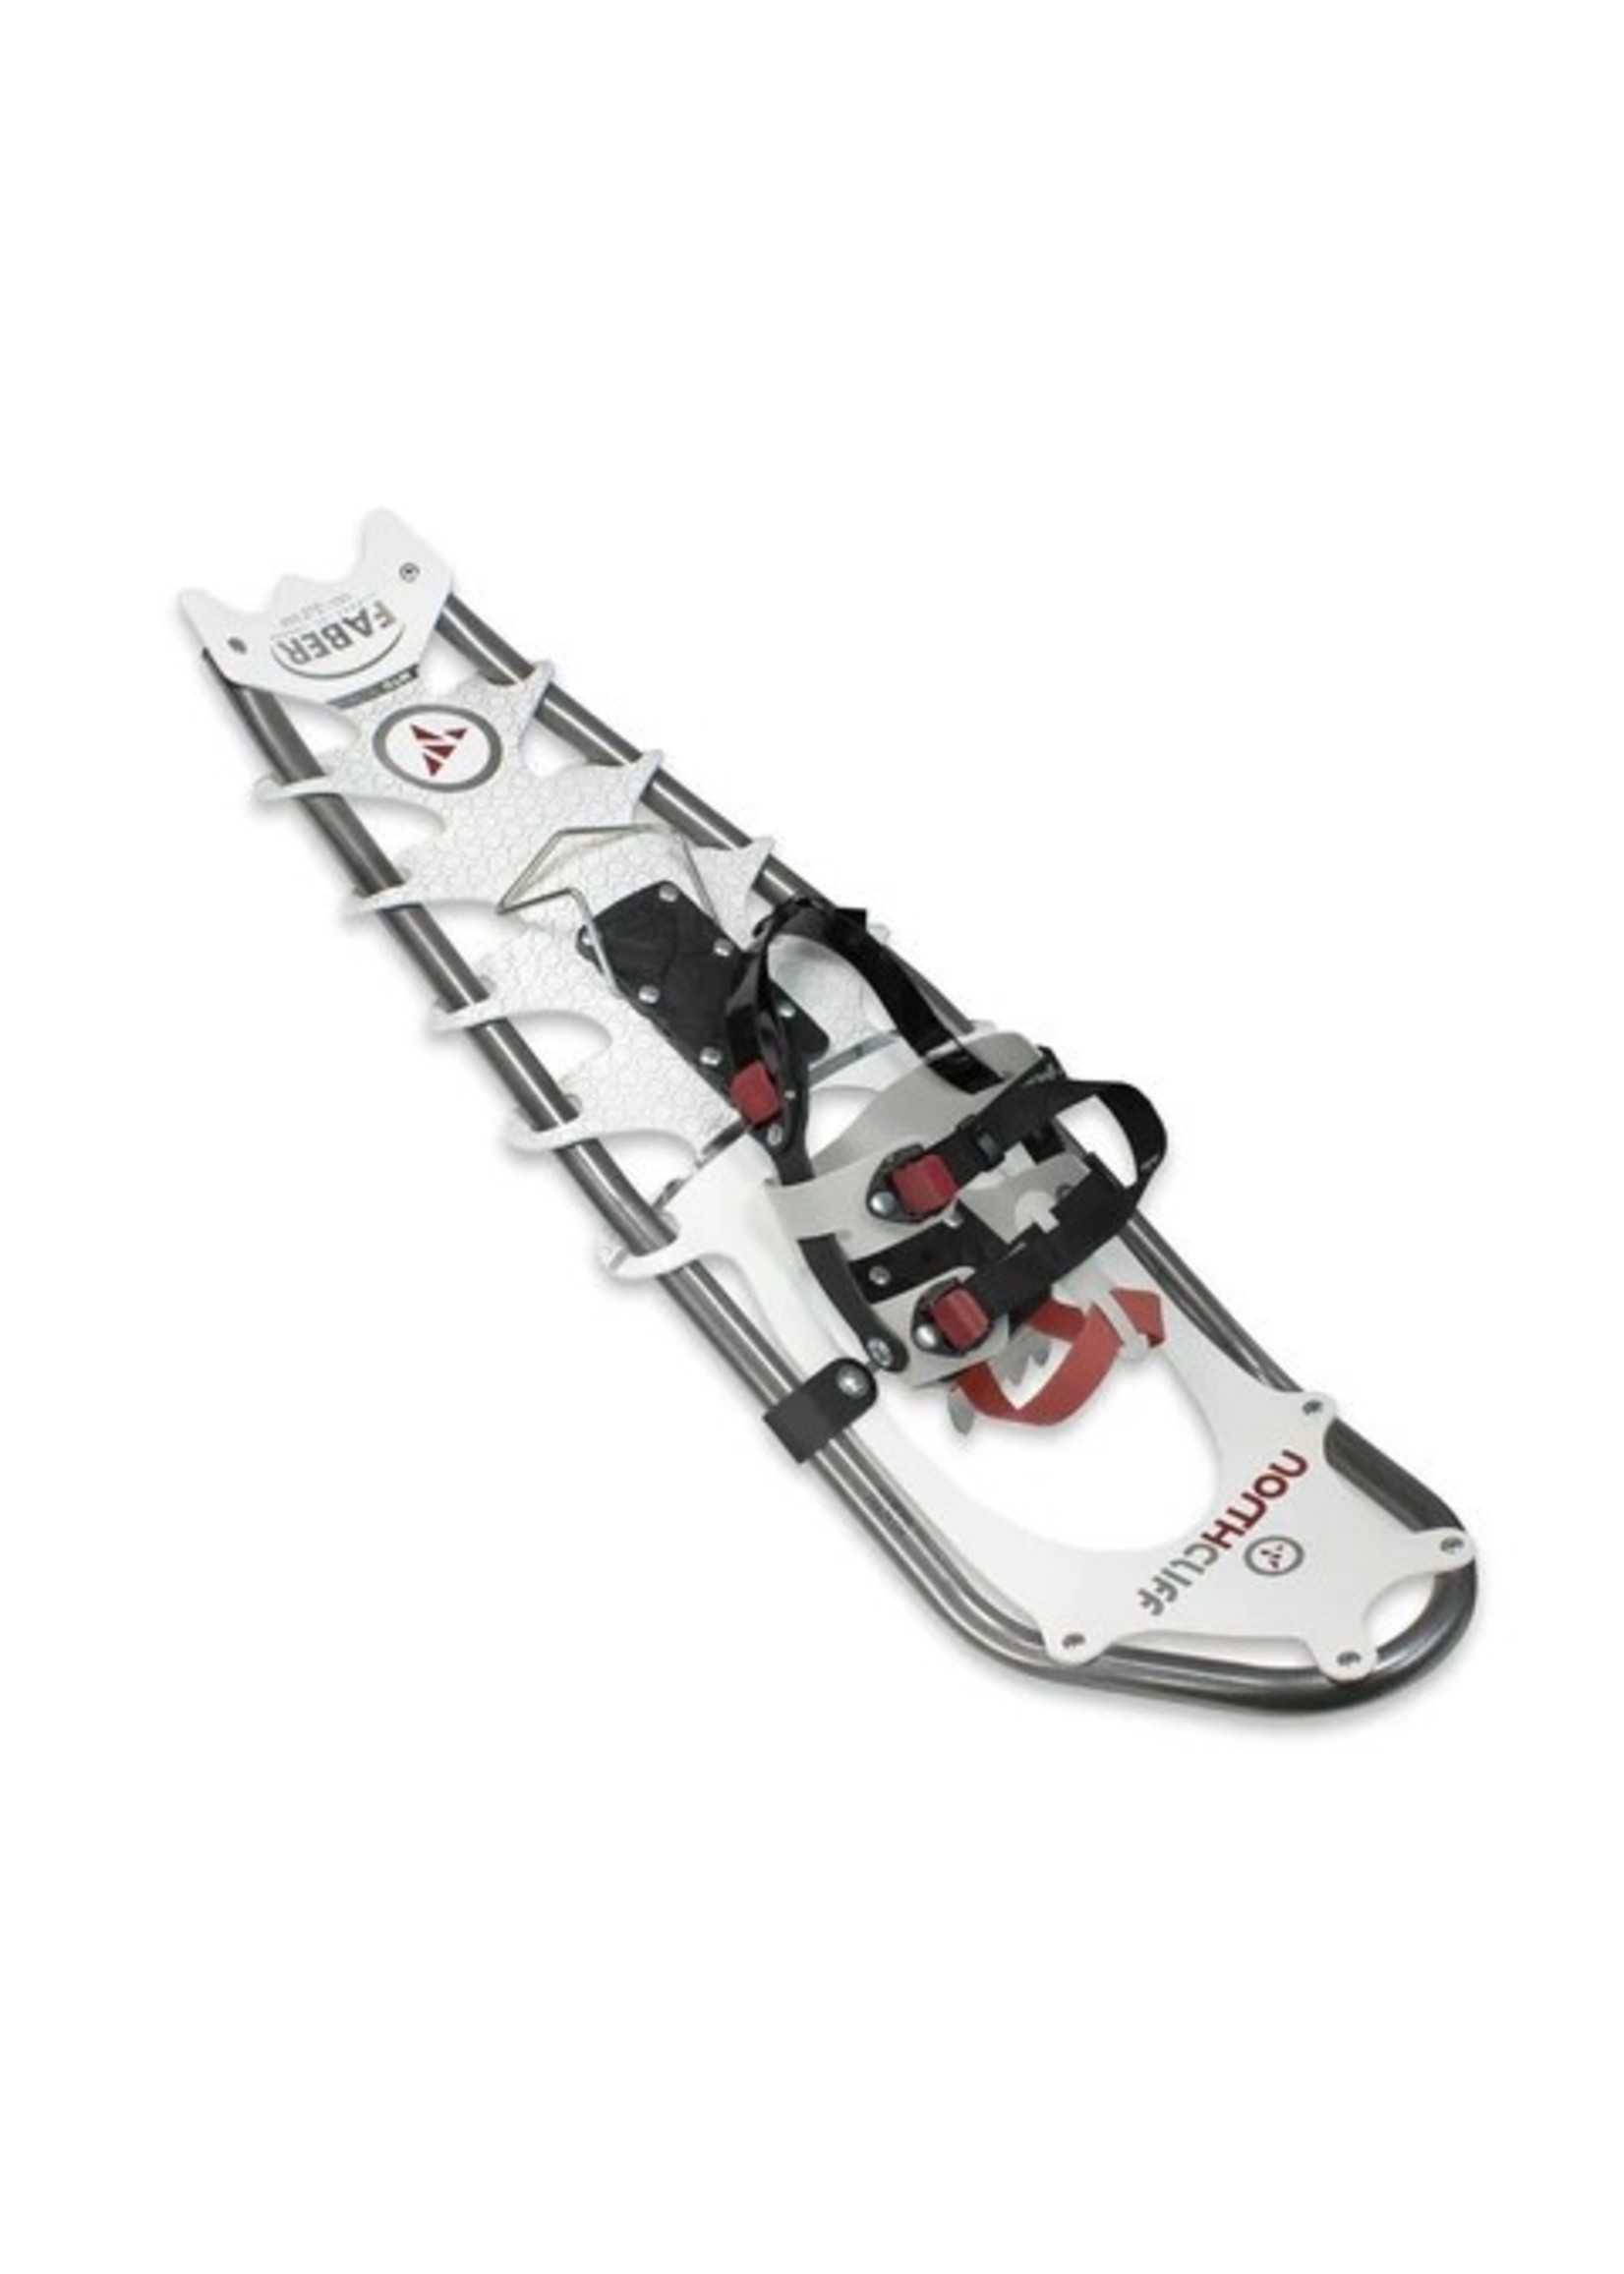 FABER NORTH CLIFF SNOWSHOE 9" X 29" 225LBS